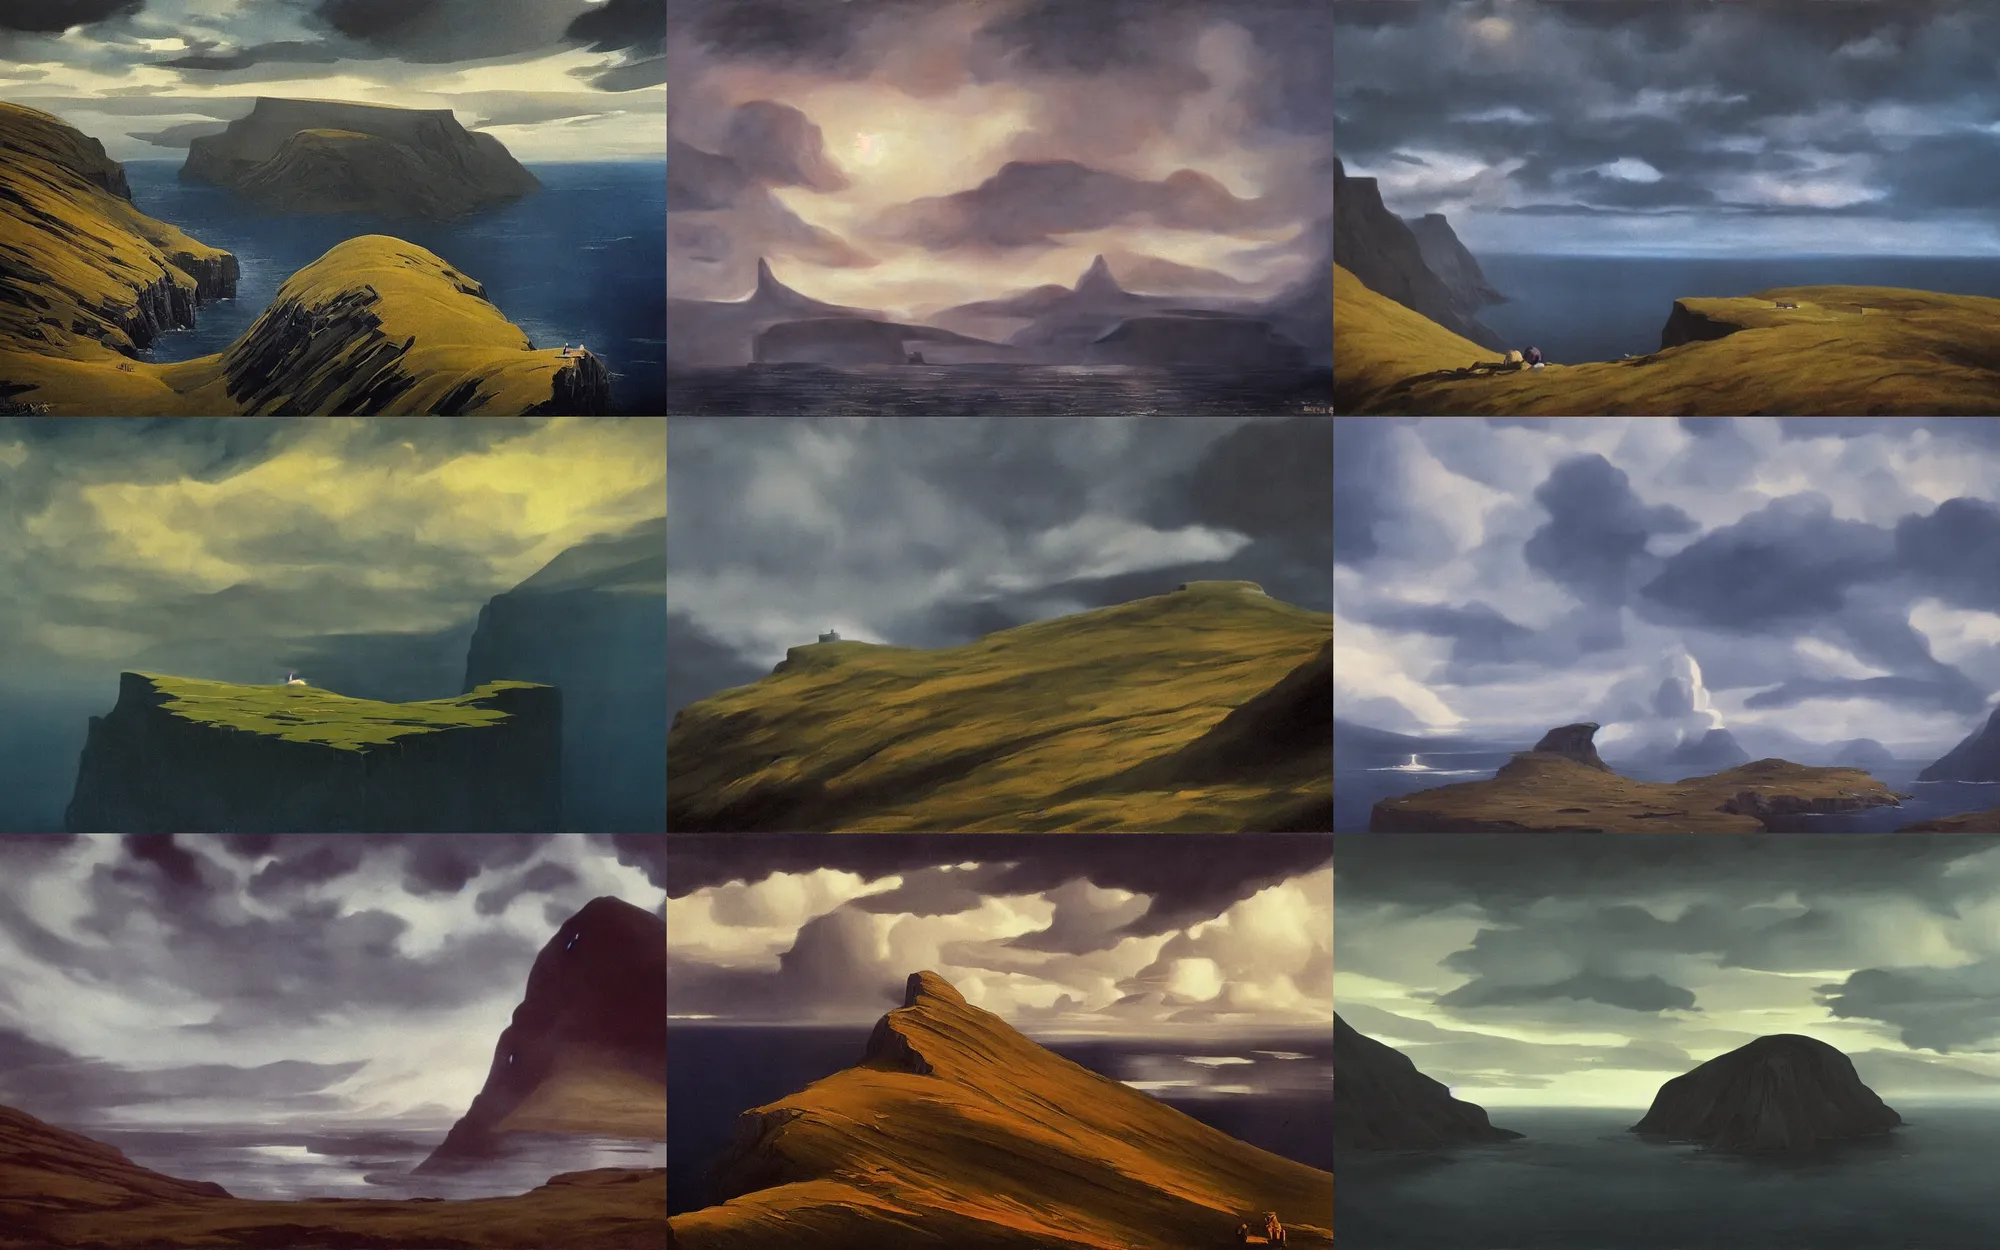 Prompt: epic composition, faroe island, cost, clouds, shot from danis villeneuve movie, roger deakins filming, nightfall, painting in the style of ed mell and william turner and Phil Buytendorp